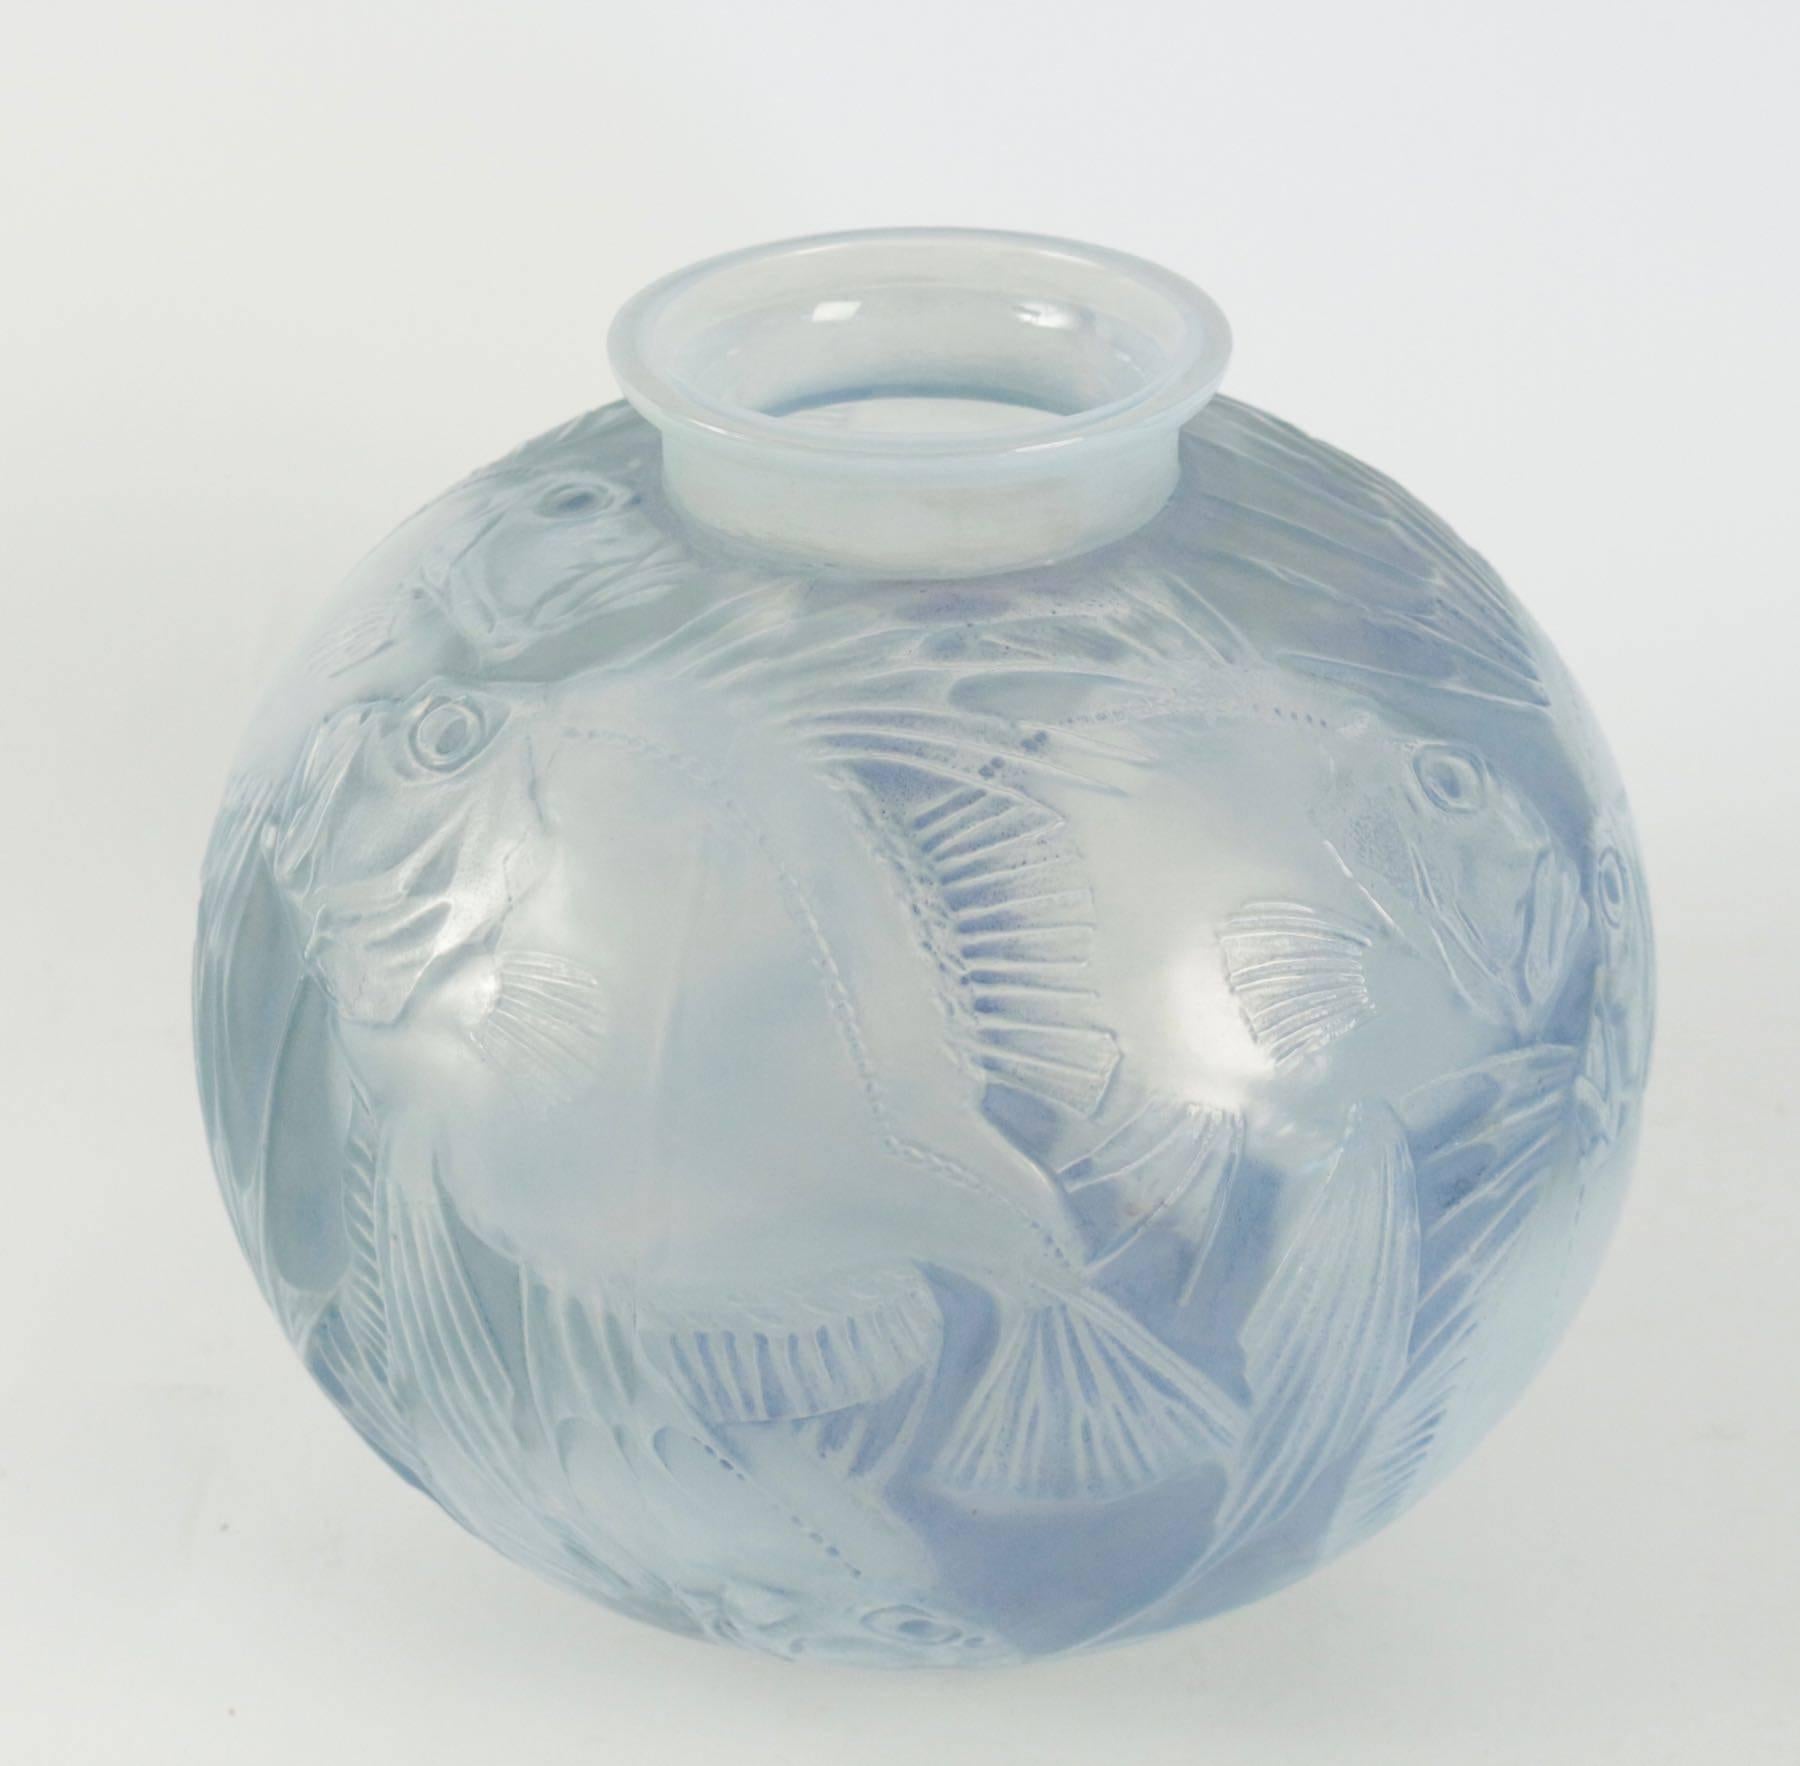 Rene Lalique (1860-1945) vase Poissons created in 1921.
Stopped in 1937.
Measuring 24.5 cm tall opalescent glass and highlighted with blue stain fish decorated glass R. Lalique Vase with both a relief molded signature on the side of the